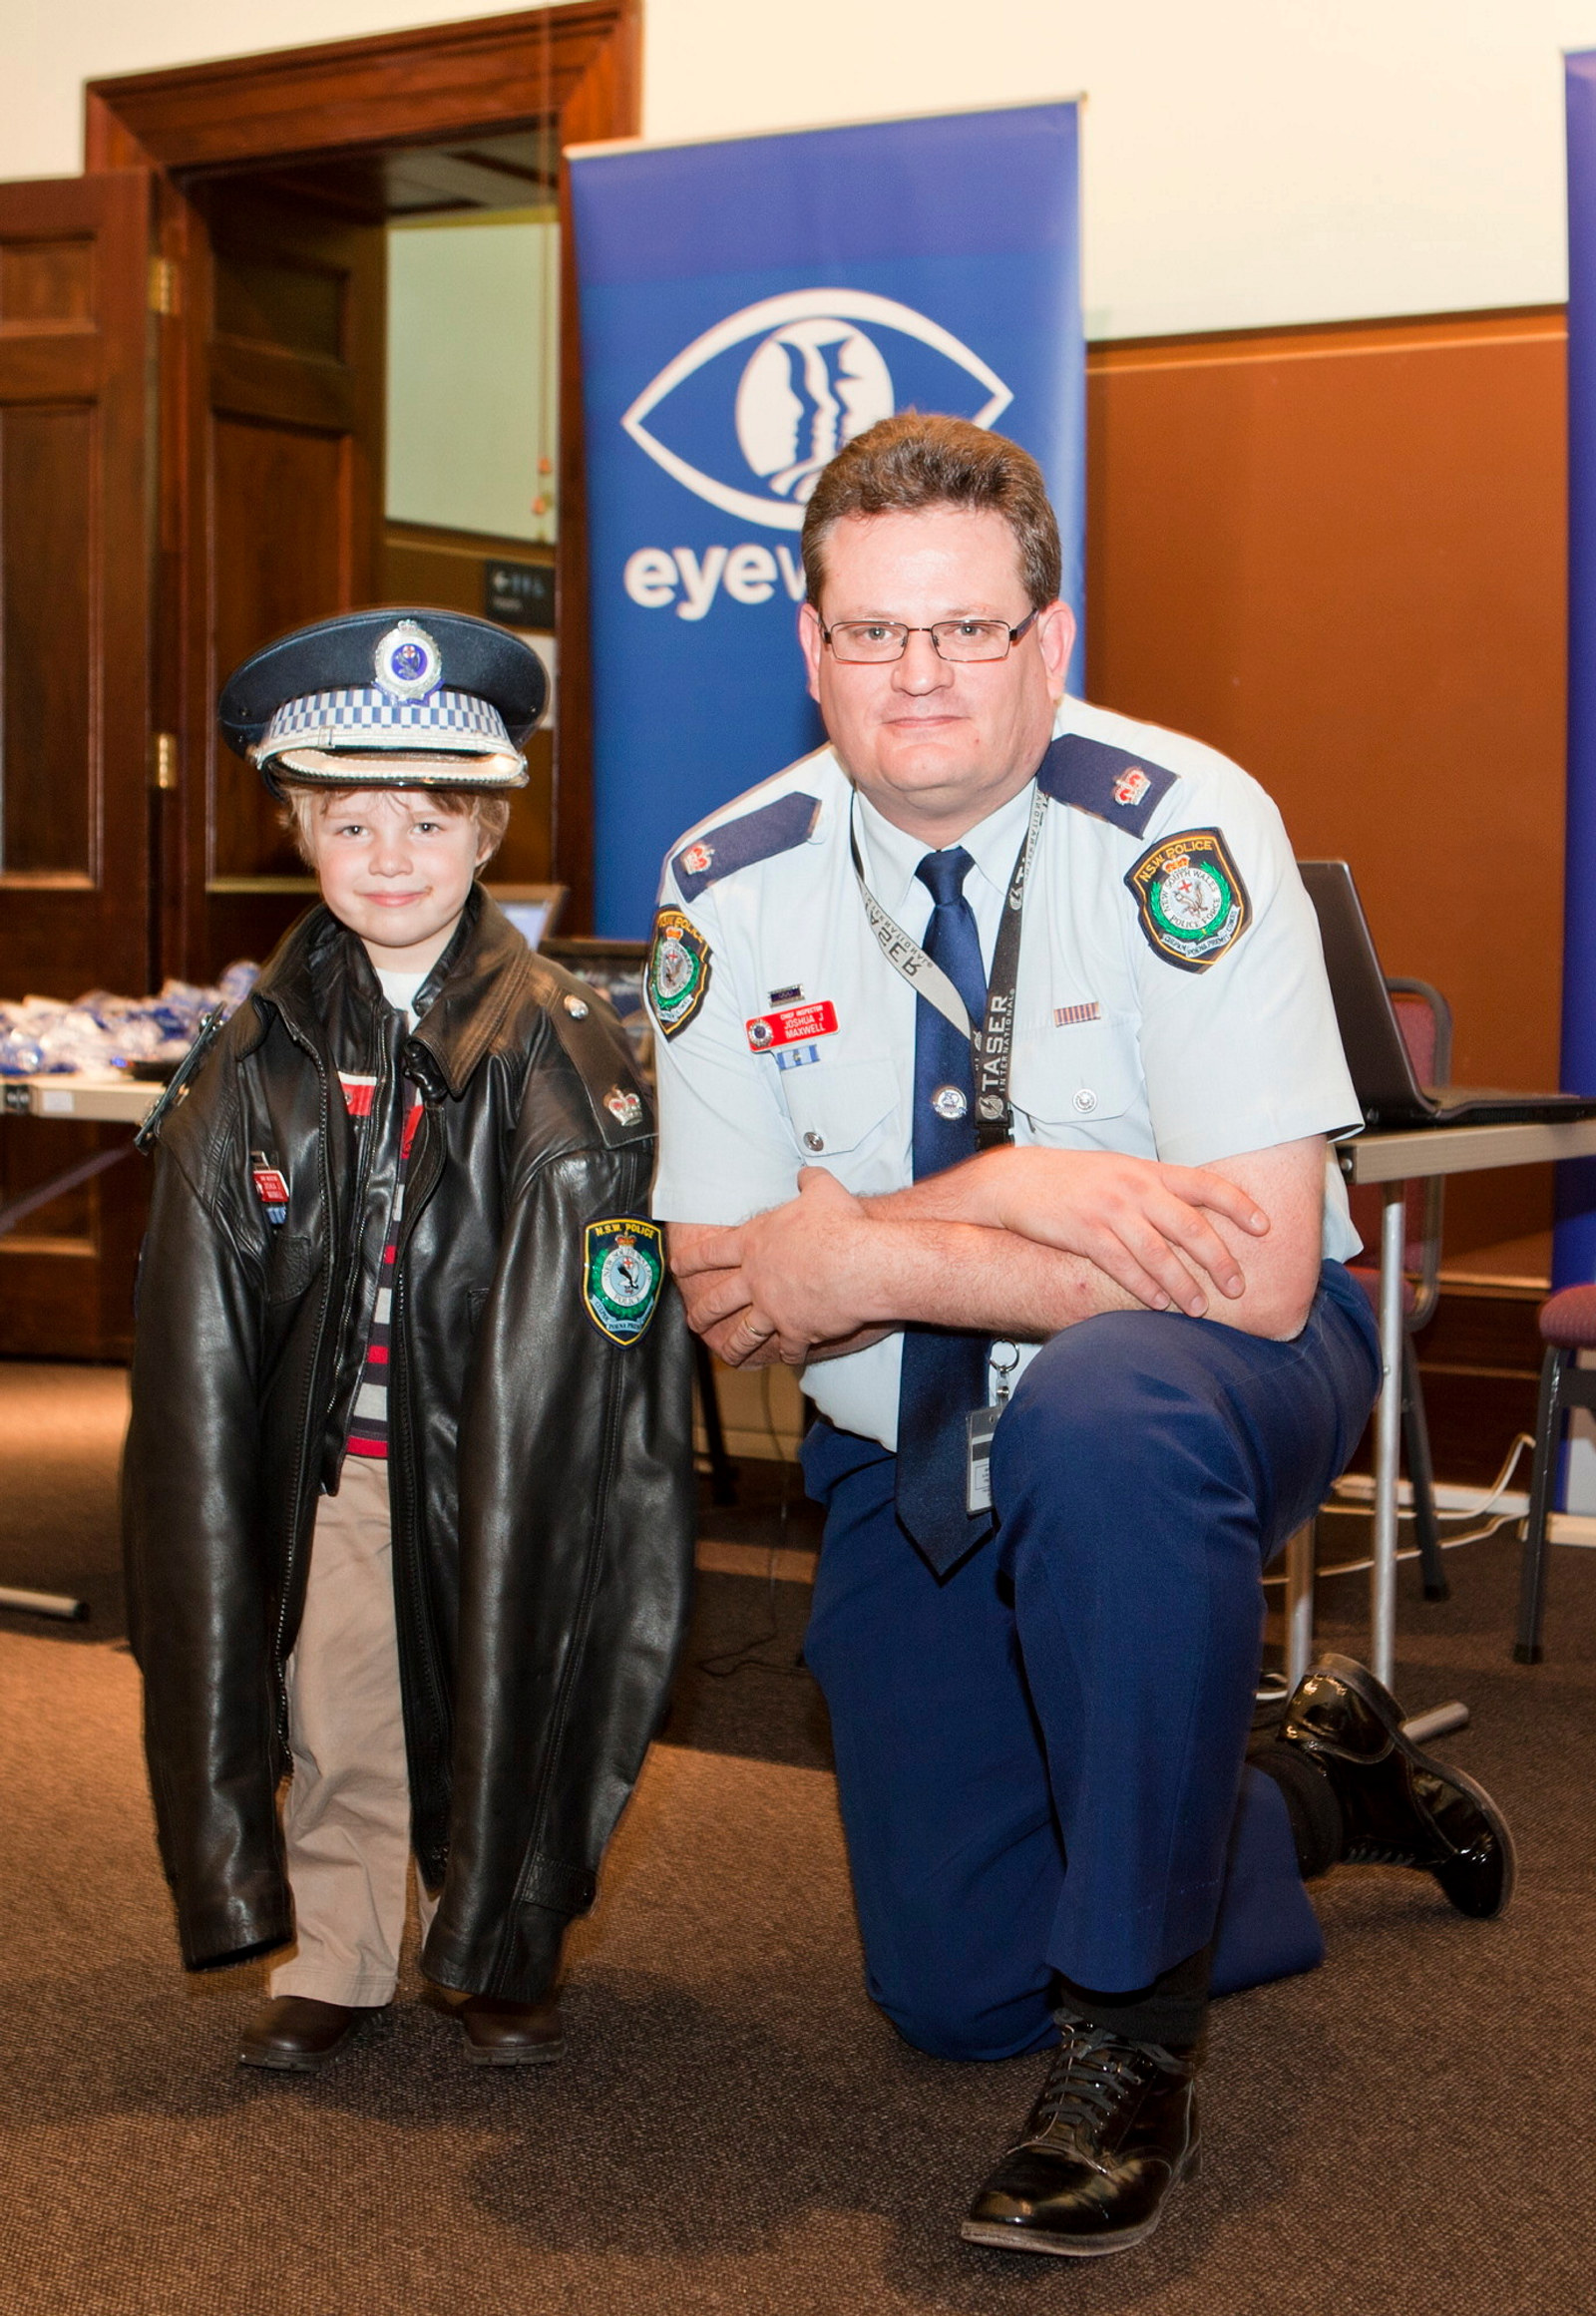 Josh Maxwell, from NSW Police Eyewatch, lends his uniform coat and hat to Stephen for a photograph in the Water Police Court at the Justice and Police Museum